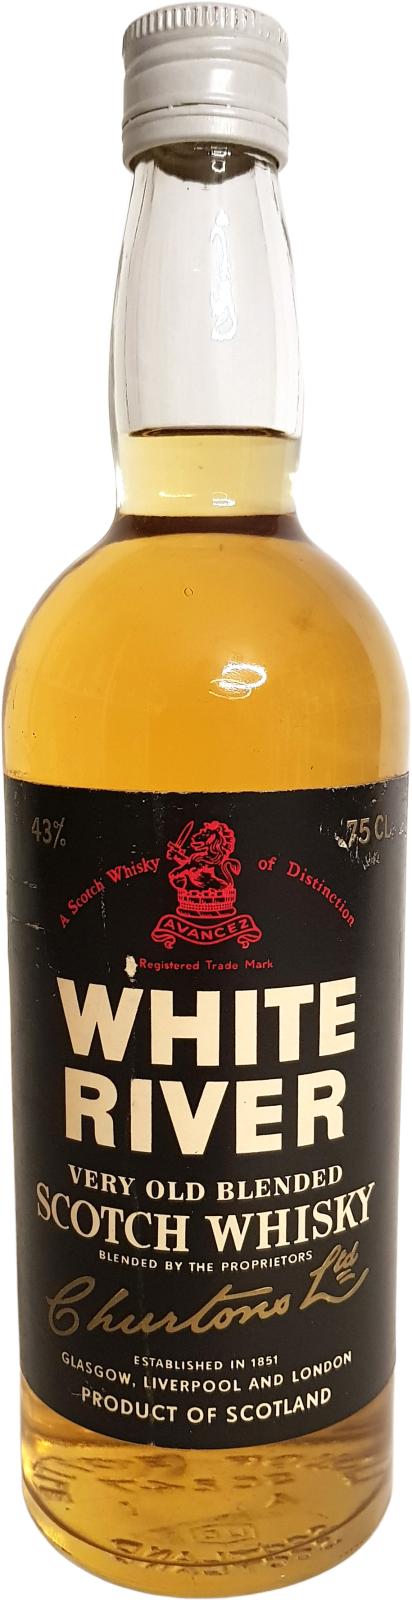 White River Very Old Blended Scotch Whisky 43% 750ml